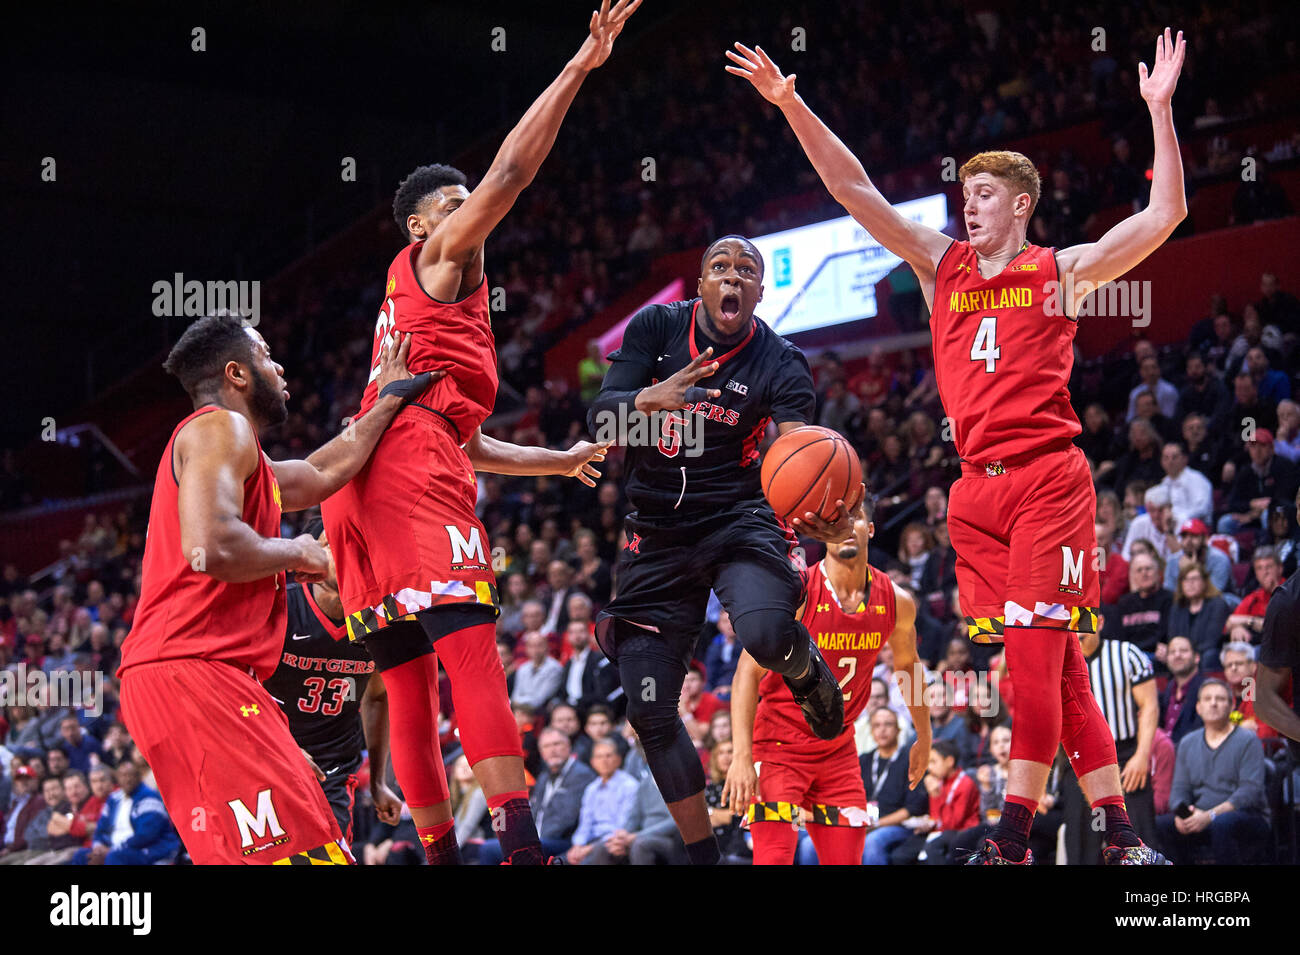 Rutgers' guard Mike Williams (5) drives to the basket past Maryland's  forwards Justin Jackson (21) and Kevin Huerter (4) in the second half at  the Louis Brown Athletic Center in Piscataway, New